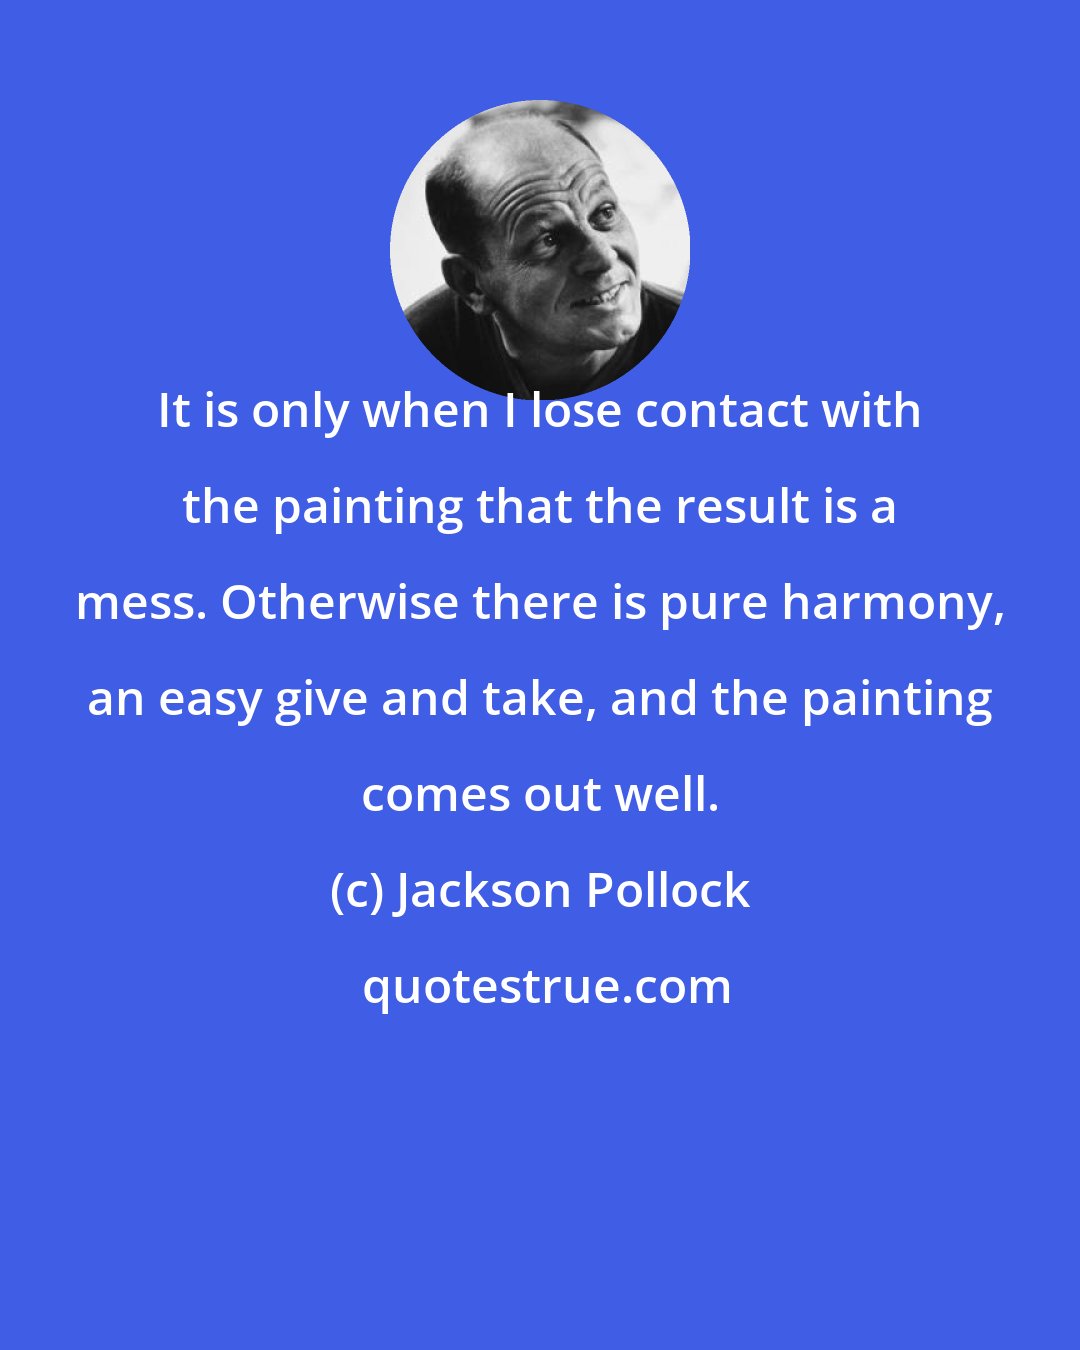 Jackson Pollock: It is only when I lose contact with the painting that the result is a mess. Otherwise there is pure harmony, an easy give and take, and the painting comes out well.